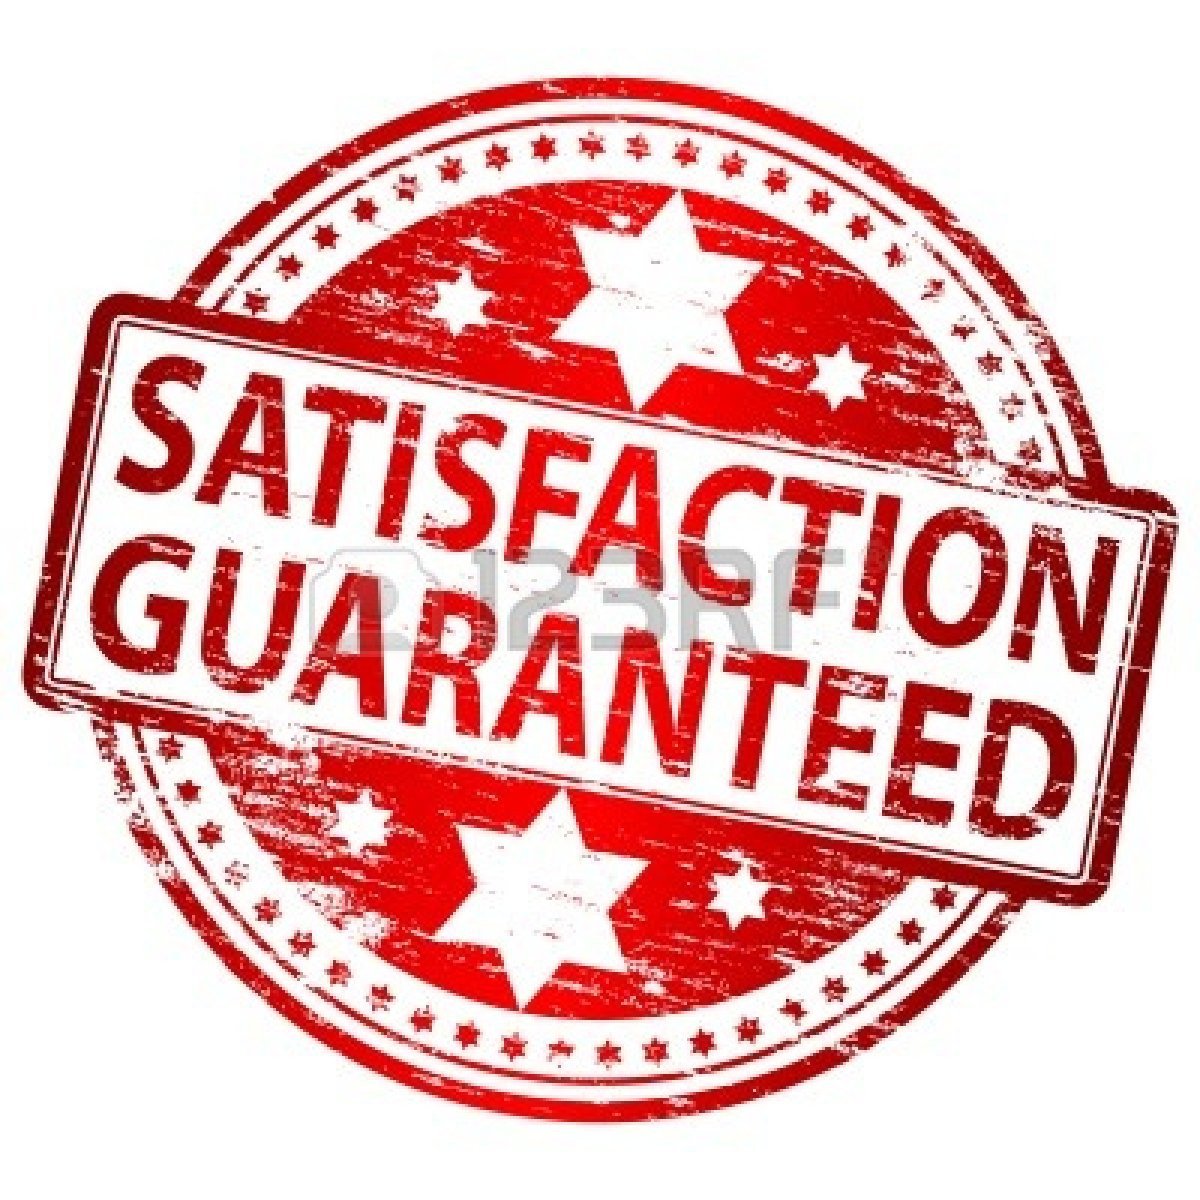 8986328 satisfaction guaranteed rubber stamp a6aedbb0 a848 446a a288 5248cbbba0ae